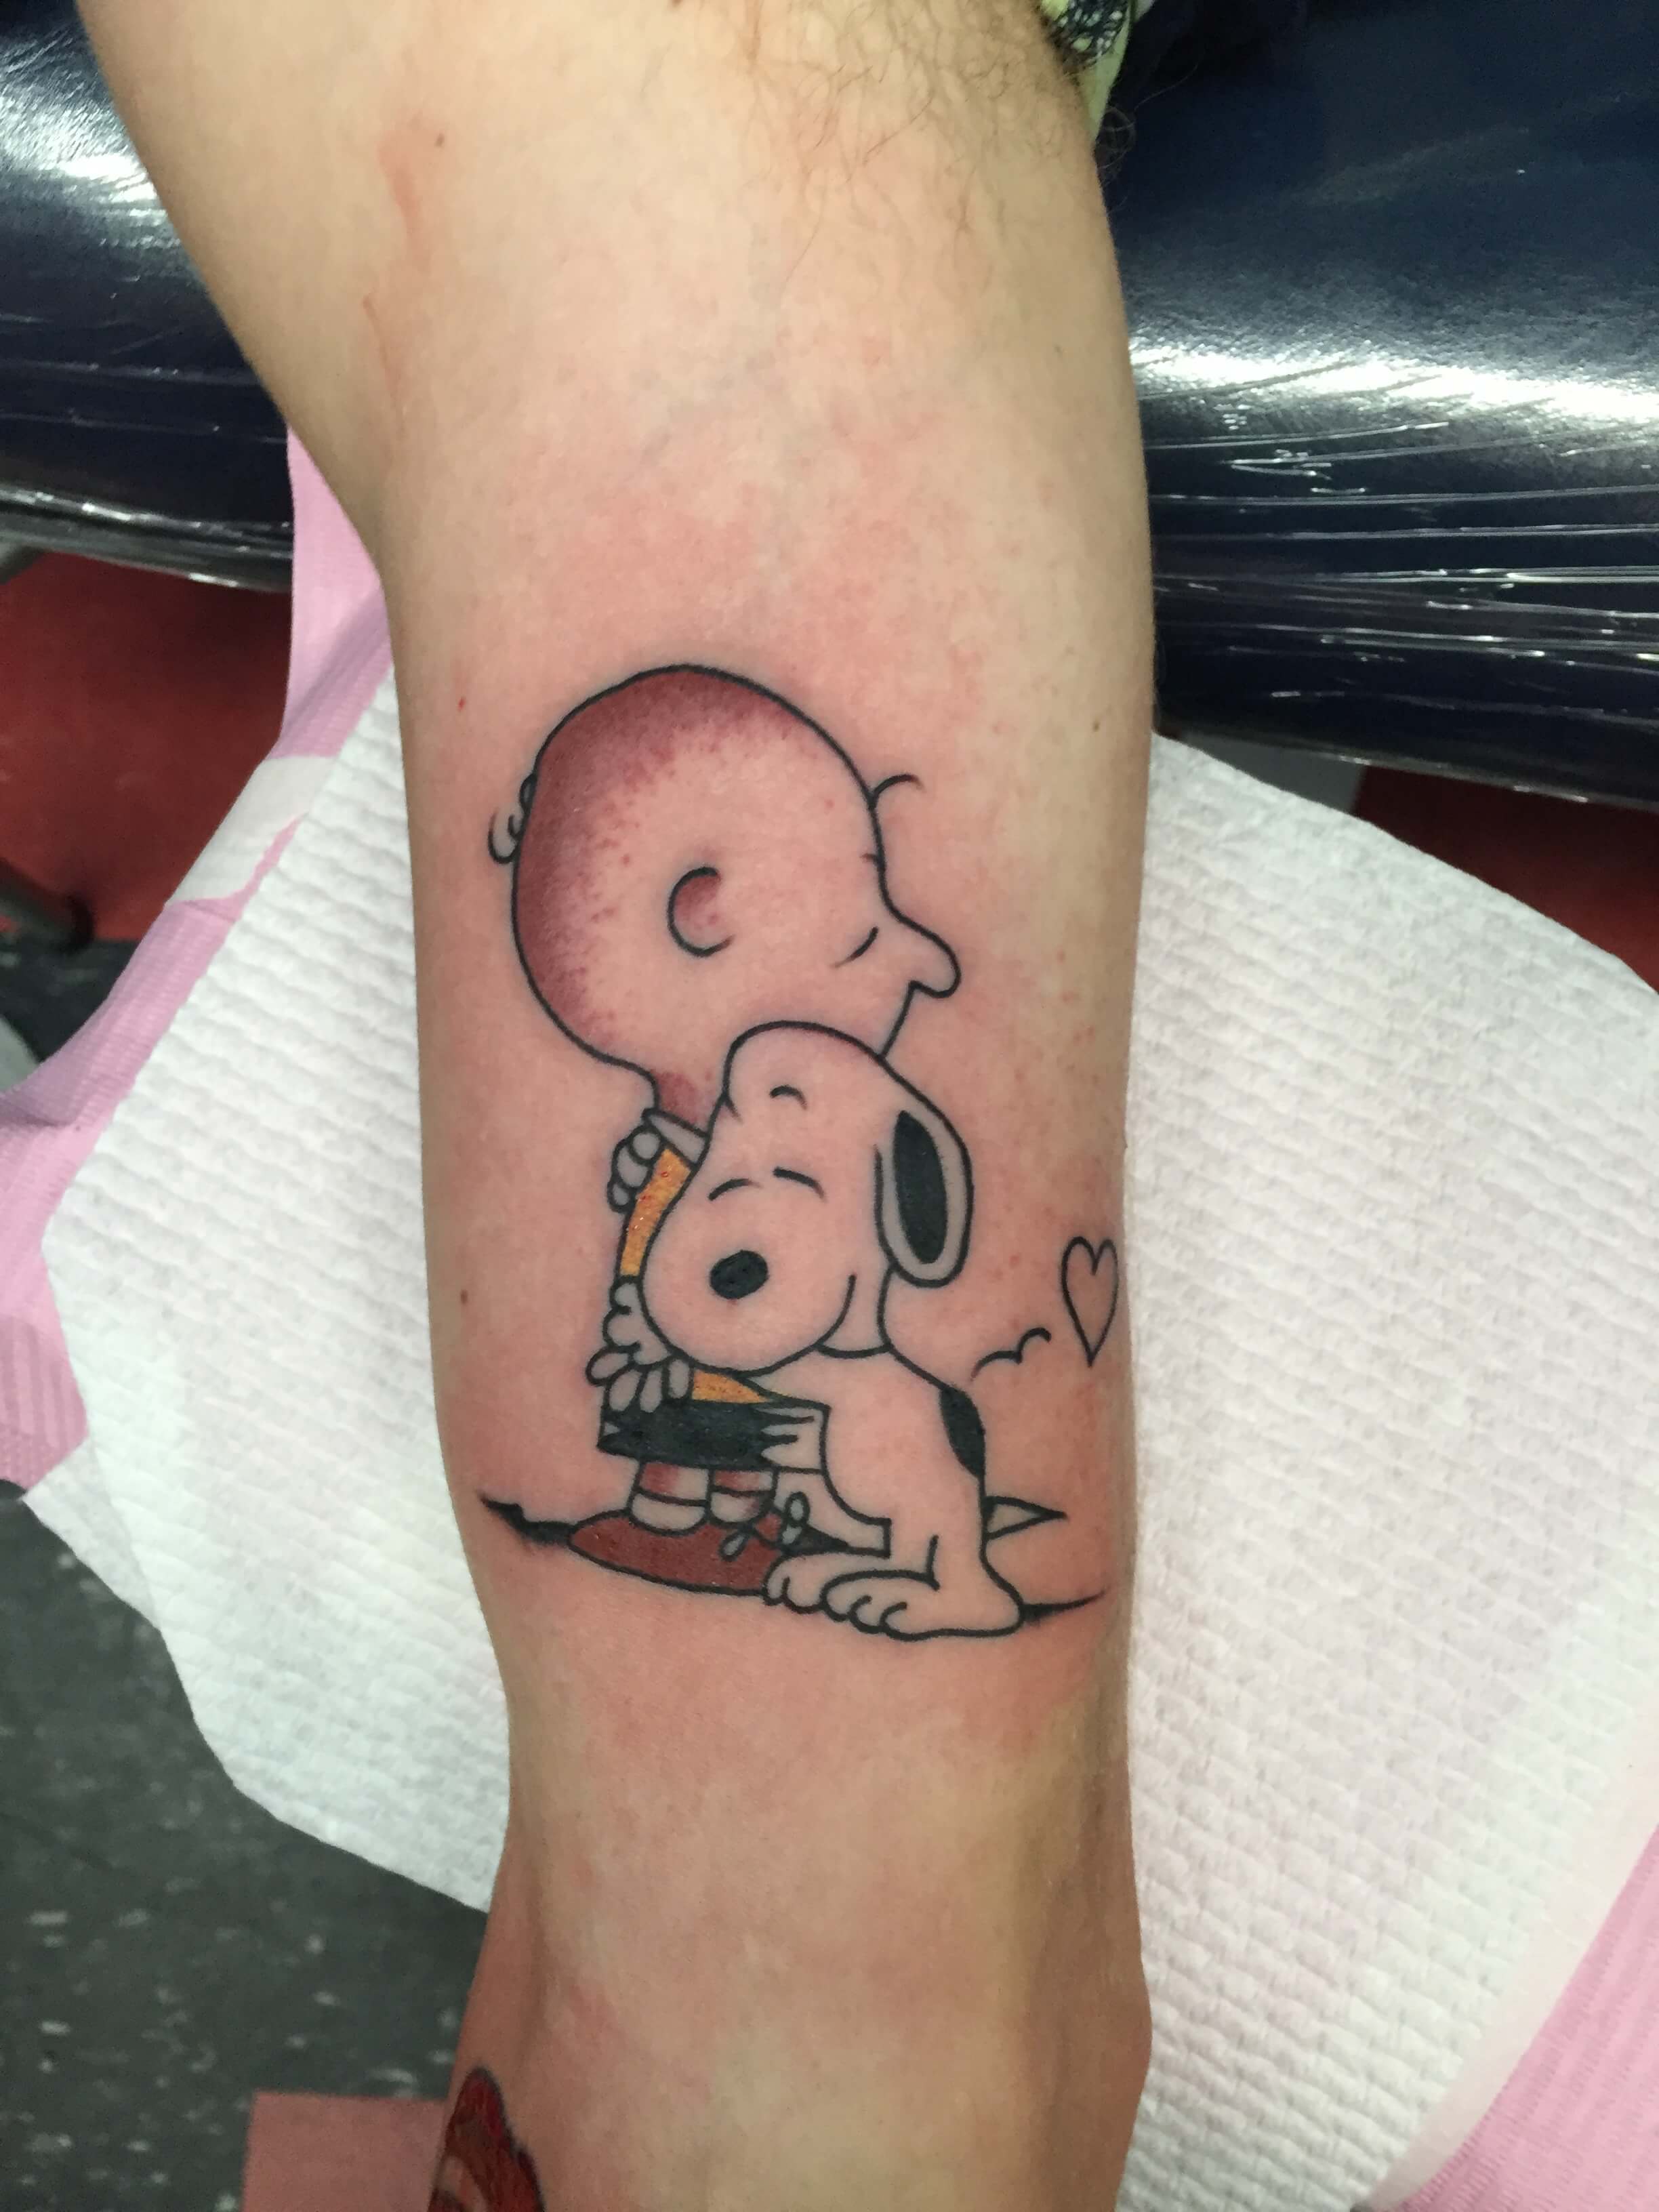 Snoopy and Charlie brown